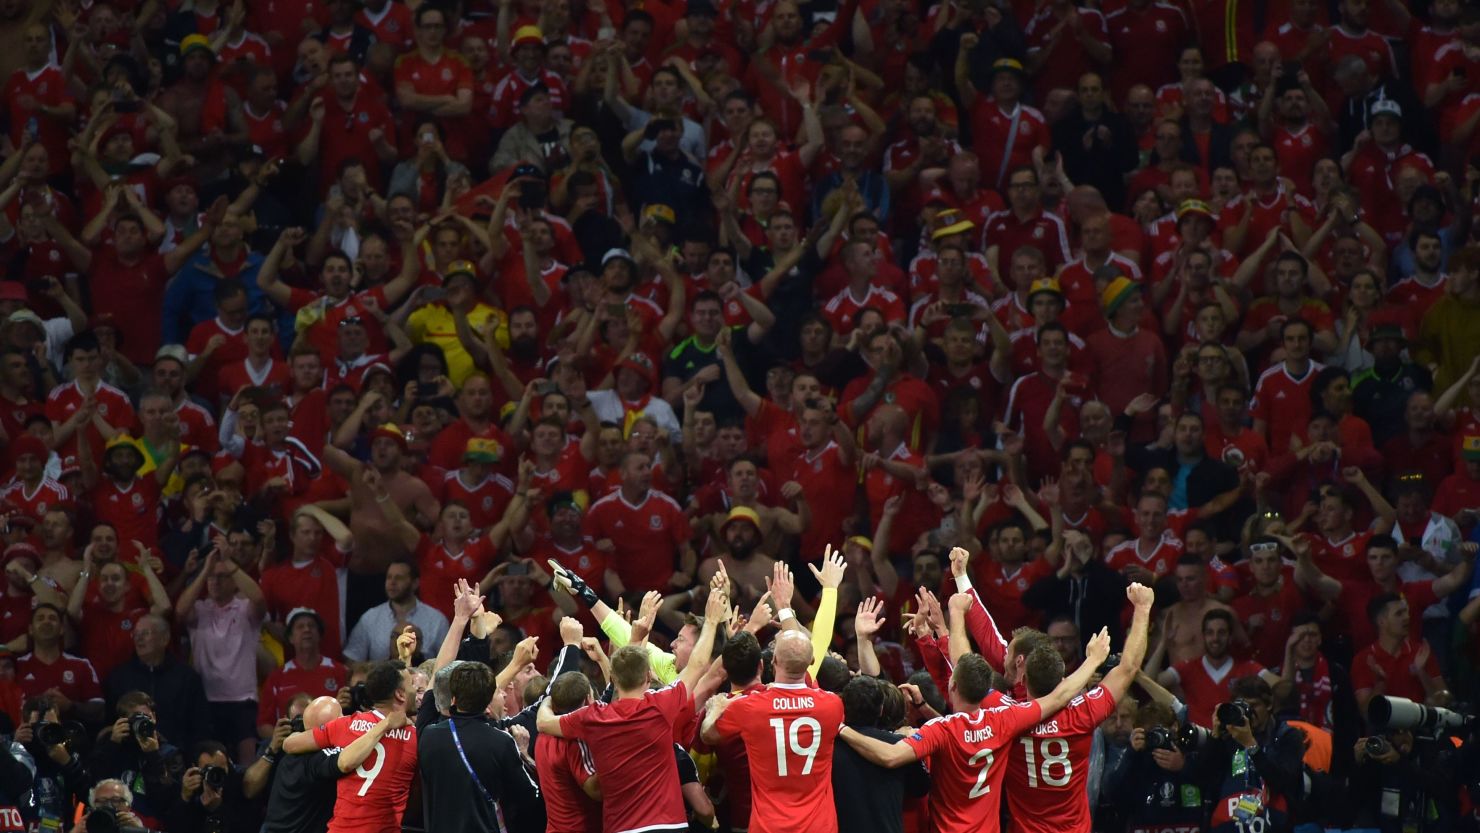 Wales players celebrate their team's 3-1 win over Belgium at Euro 2016.